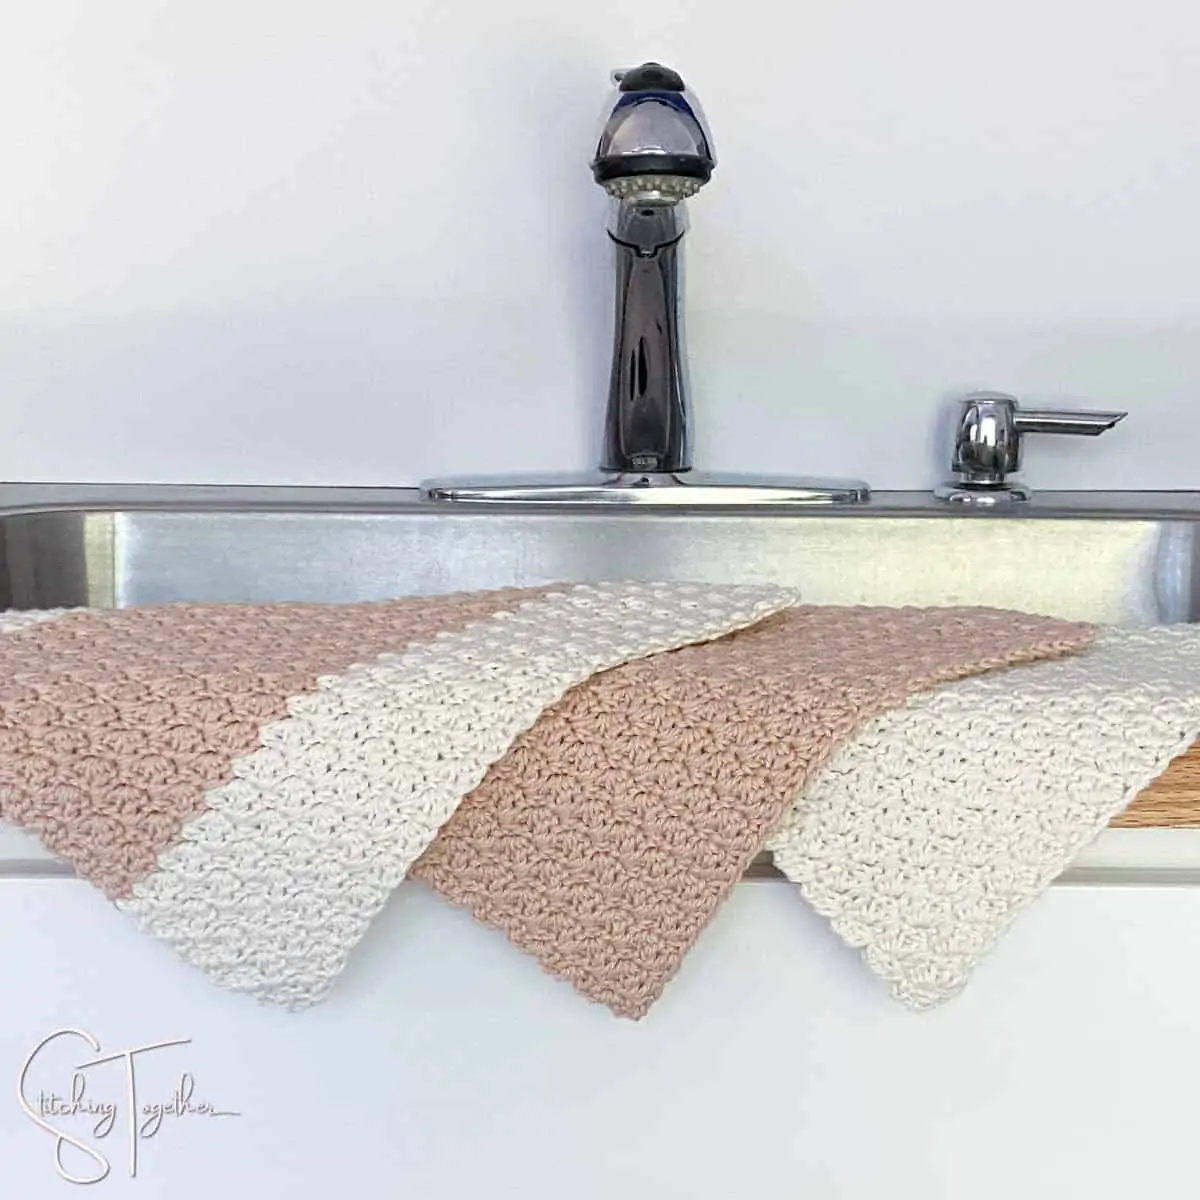 3 crochet dishcloths draped over the side of a sink